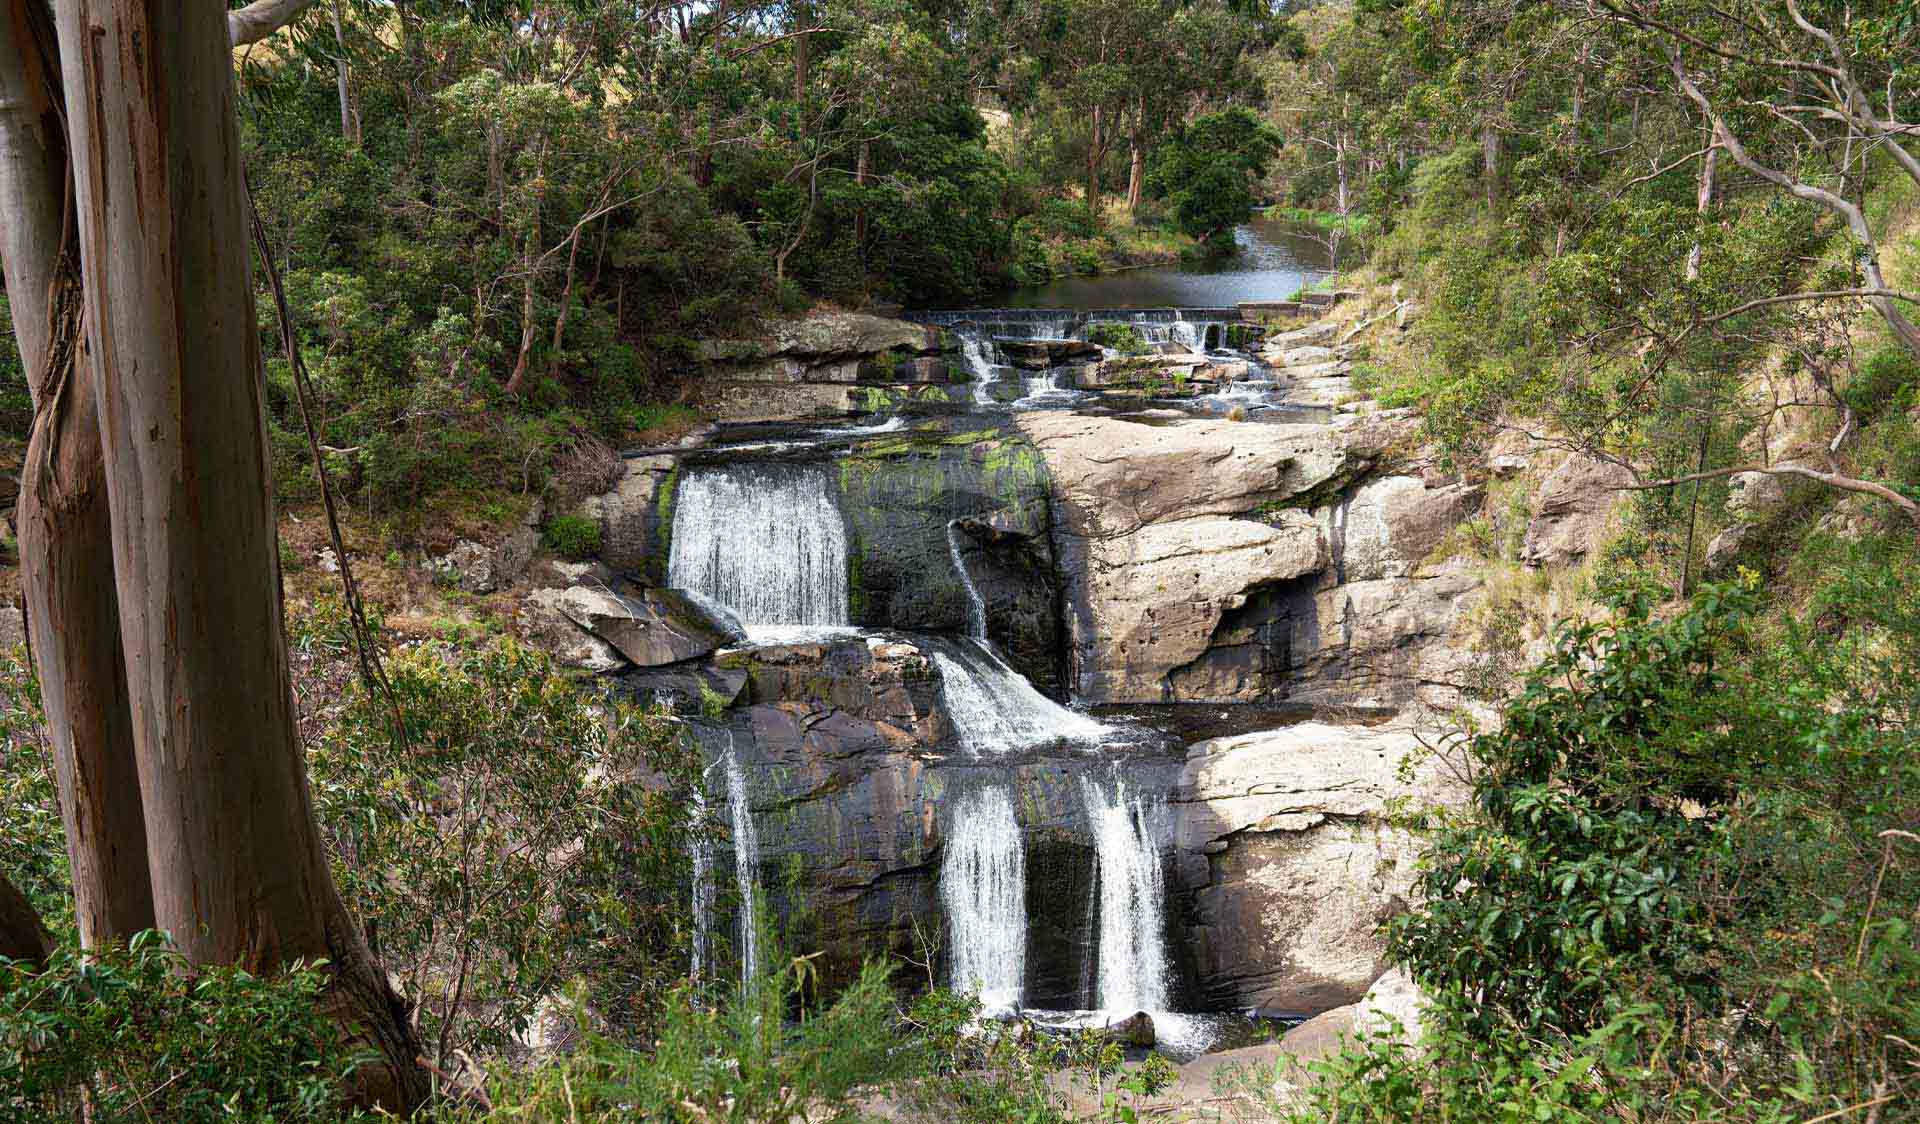 The waterfall at Agnes Falls Scenic Reserve